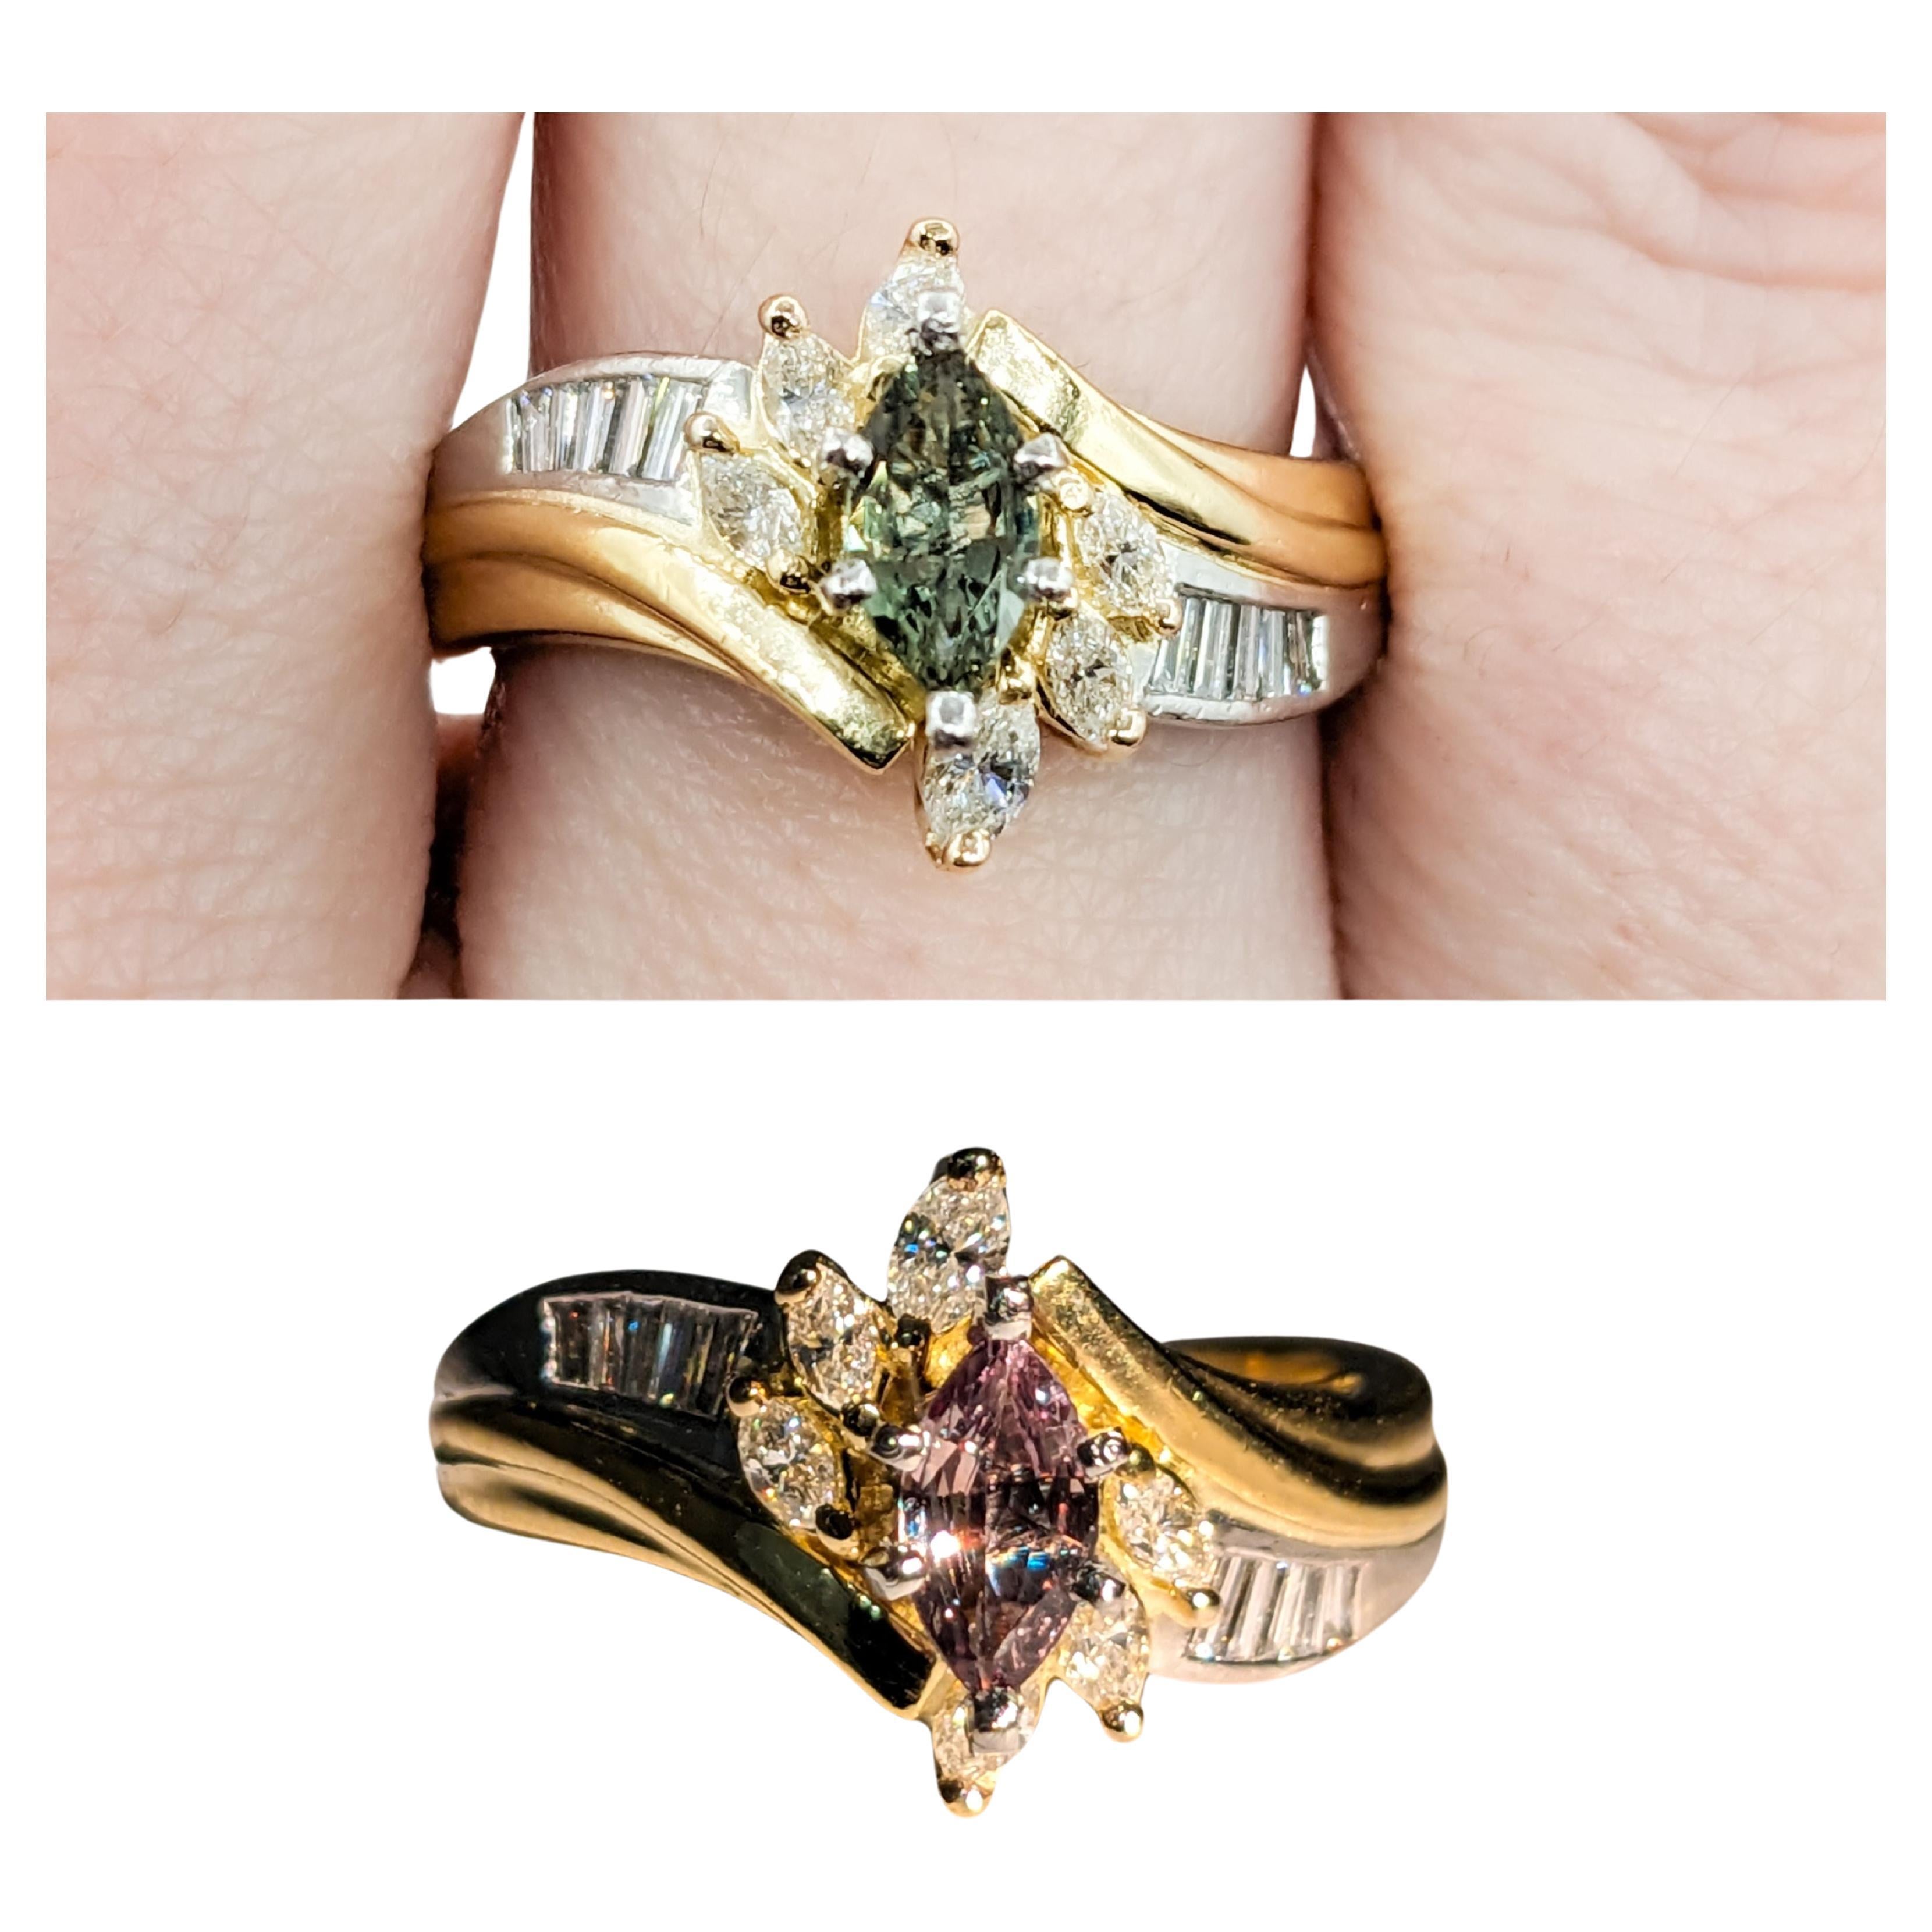 .36ct Natural Color Change Alexandrite & Diamond Ring In Yellow Gold and Platinum

Introducing a stunning natural Alexandrite ring, masterfully crafted in a luxurious blend of 18k yellow gold and platinum. The centerpiece of the ring is a rare .36ct